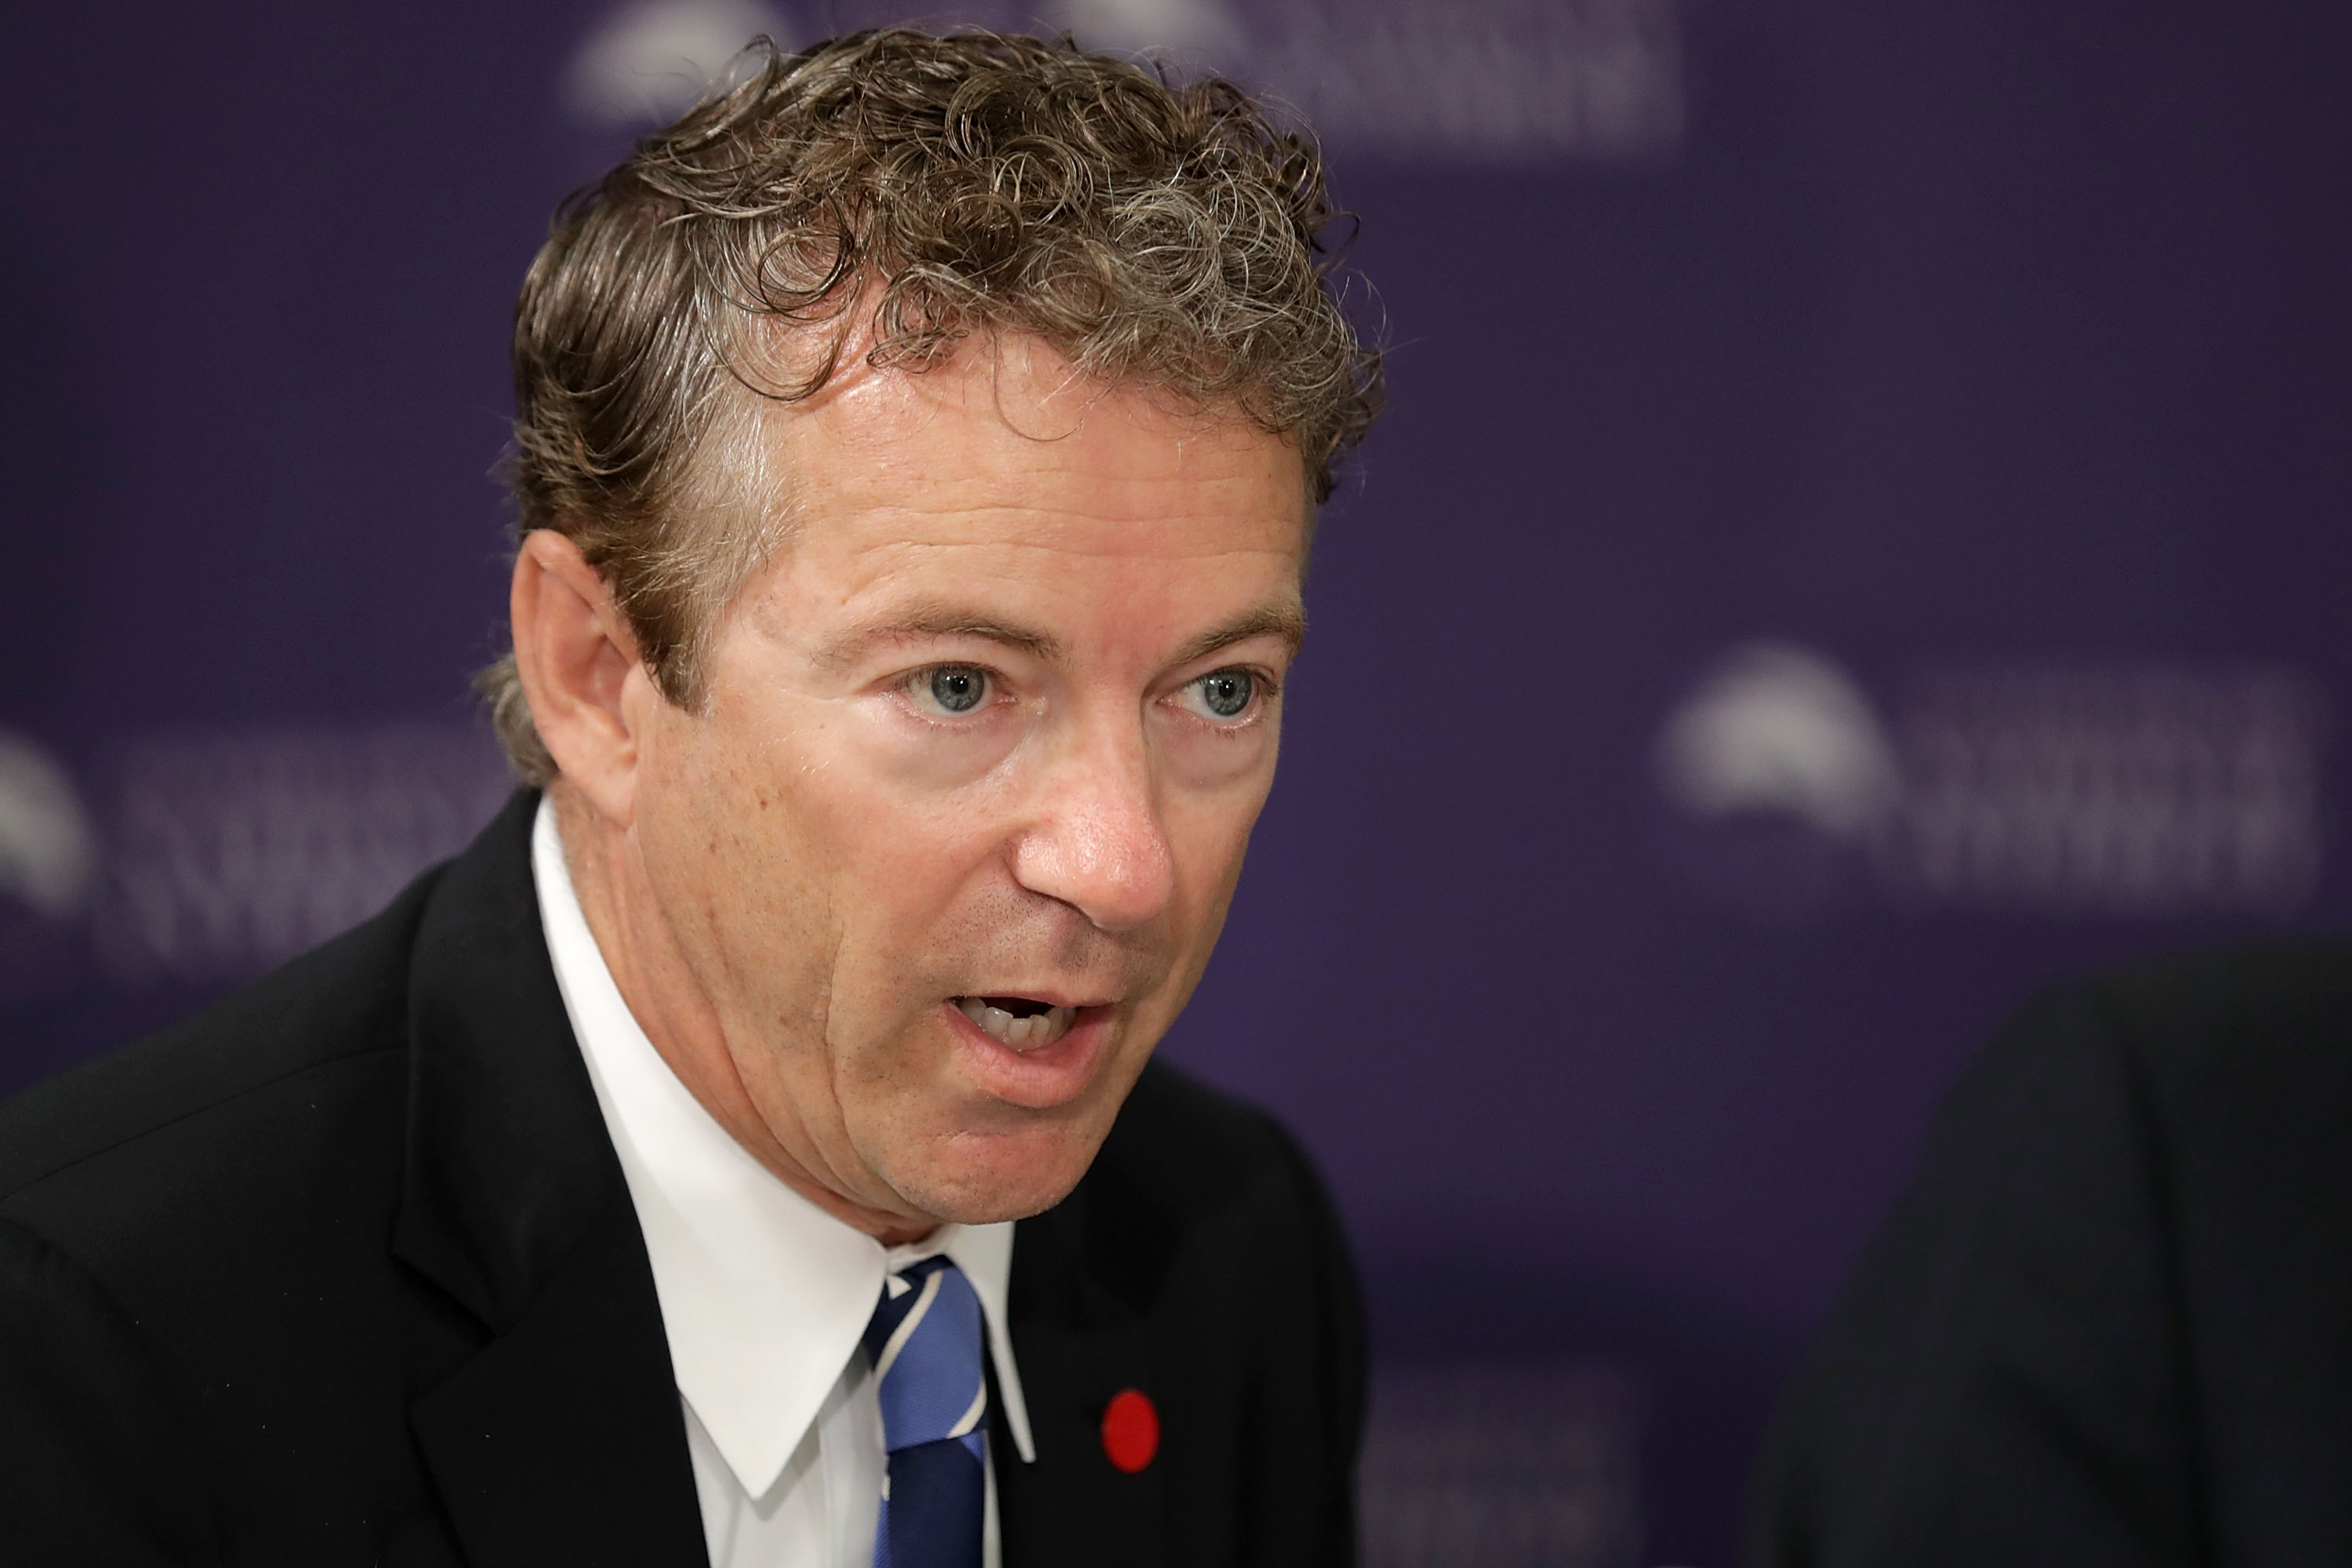 Sen. Rand Paul (R-KY) participates in a discussion about legislation to halt the sale of some weapons to Saudi Arabia at the Center for the National Interest on Sept. 19, 2016 in Washington, D.C. (Chip Somodevilla/Getty Images)